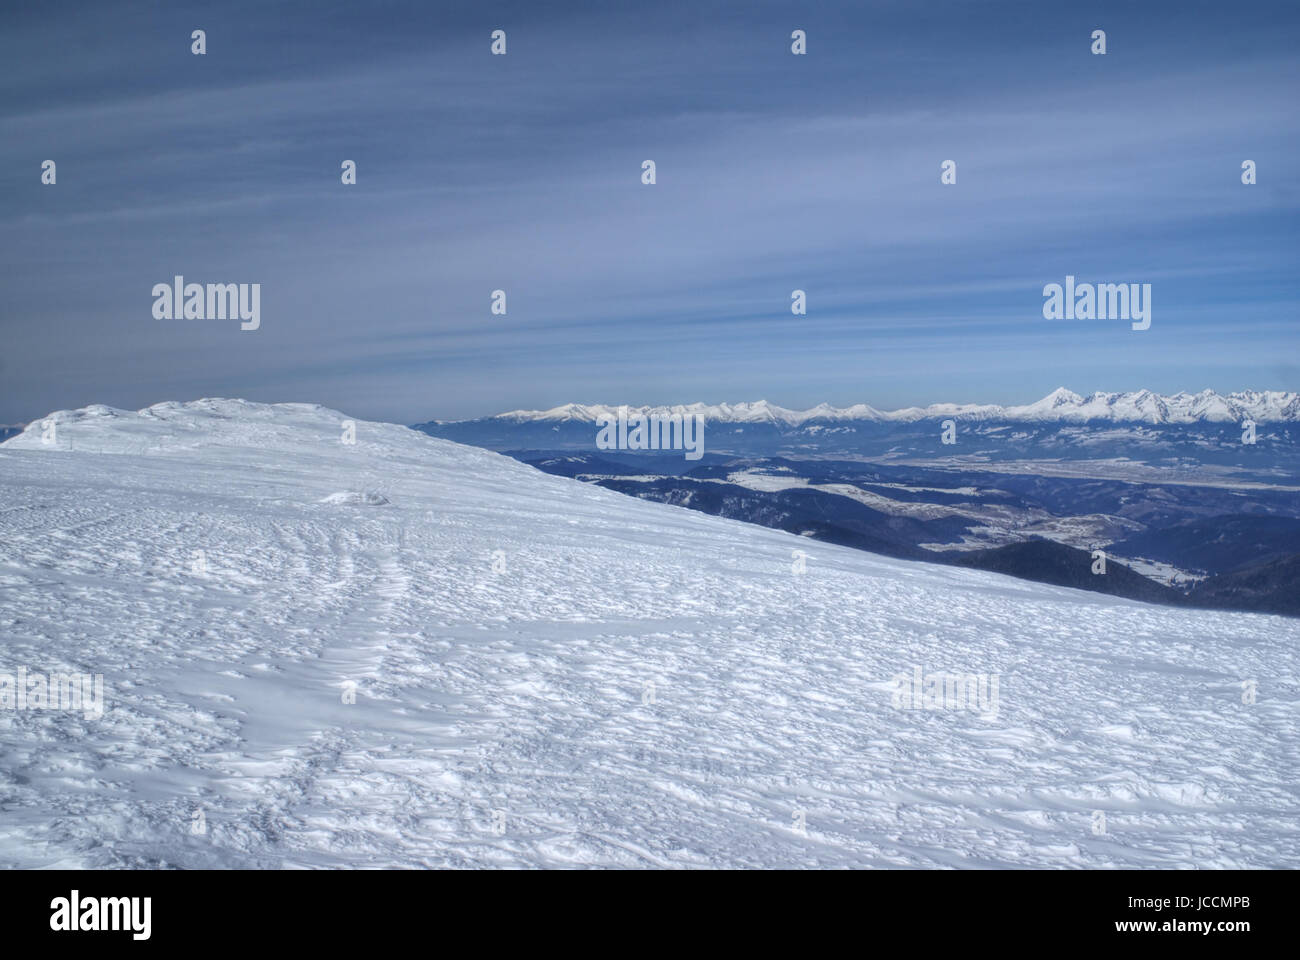 Picturesque view of Kralova hola Mountain in Low Tatras covered in snow, Slovakia Stock Photo